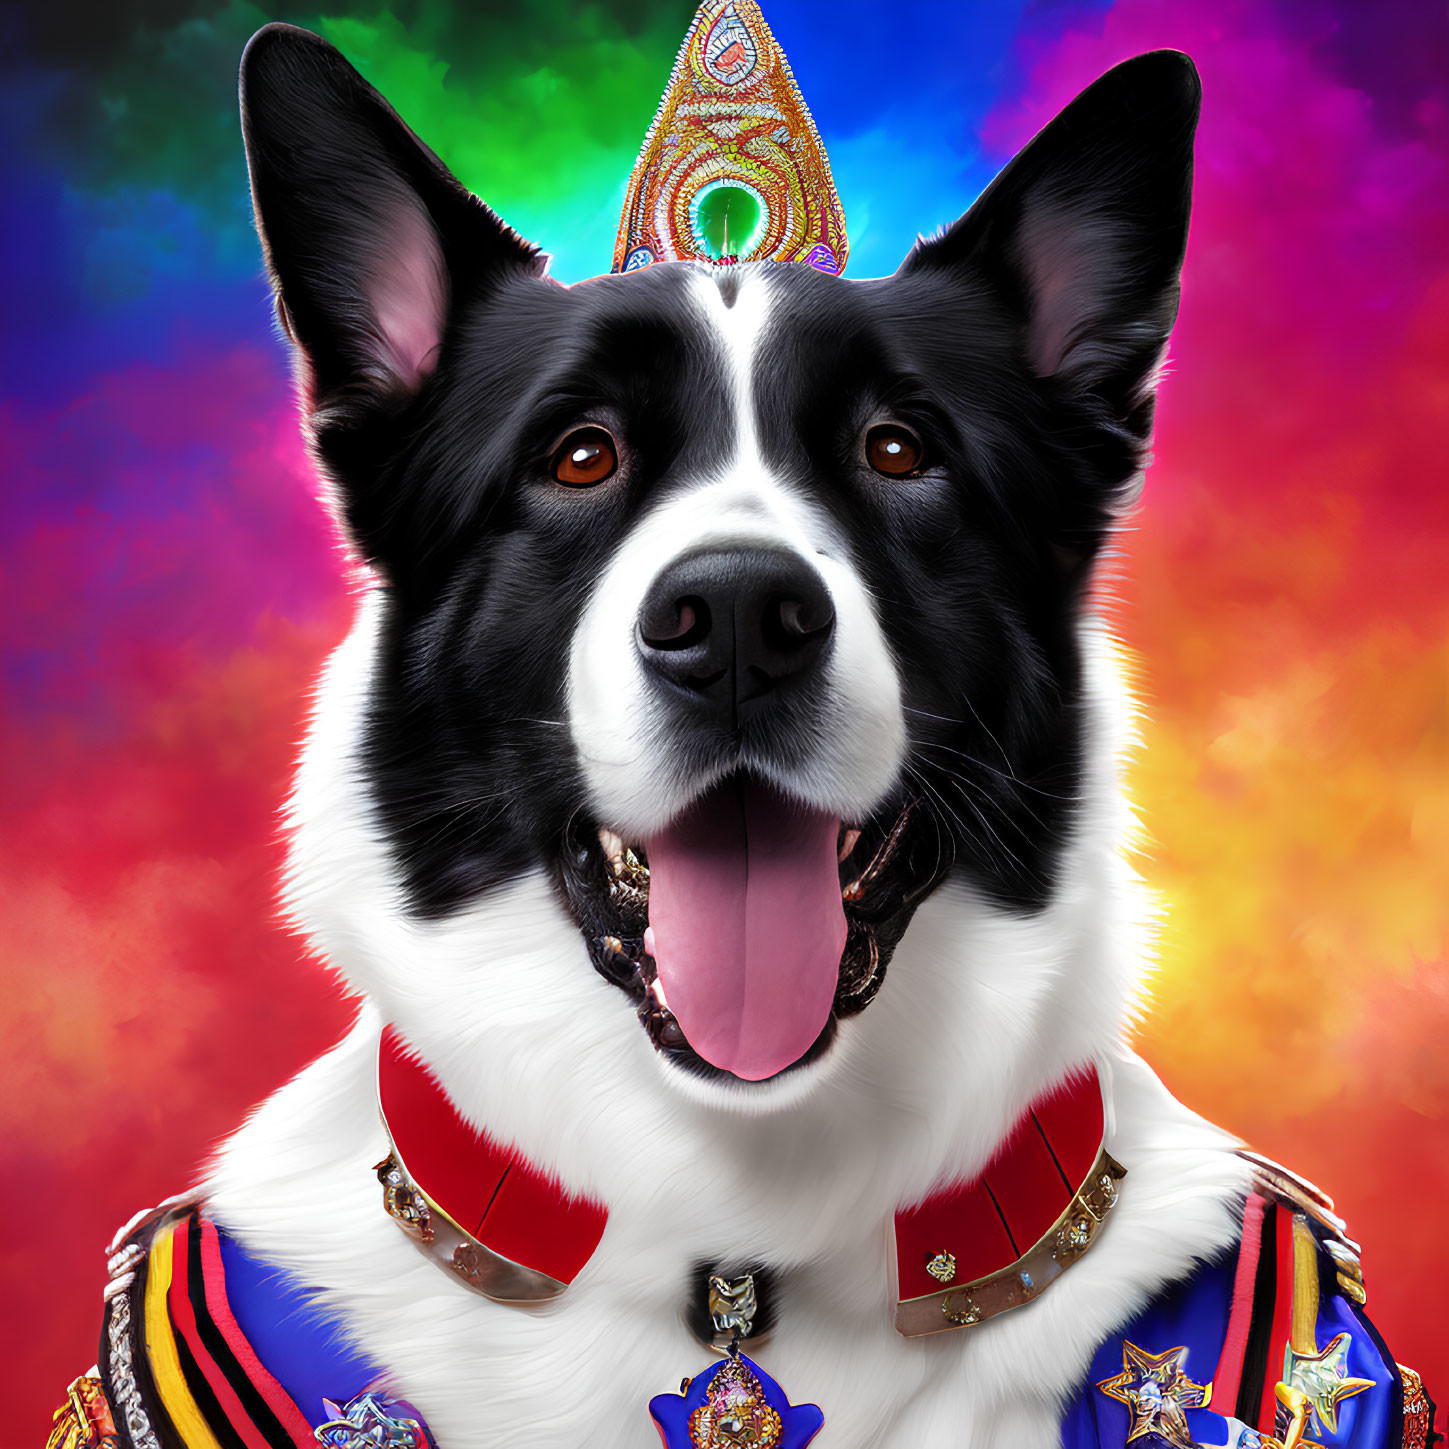 Colorful Royal Outfit Border Collie with Medals on Rainbow Background